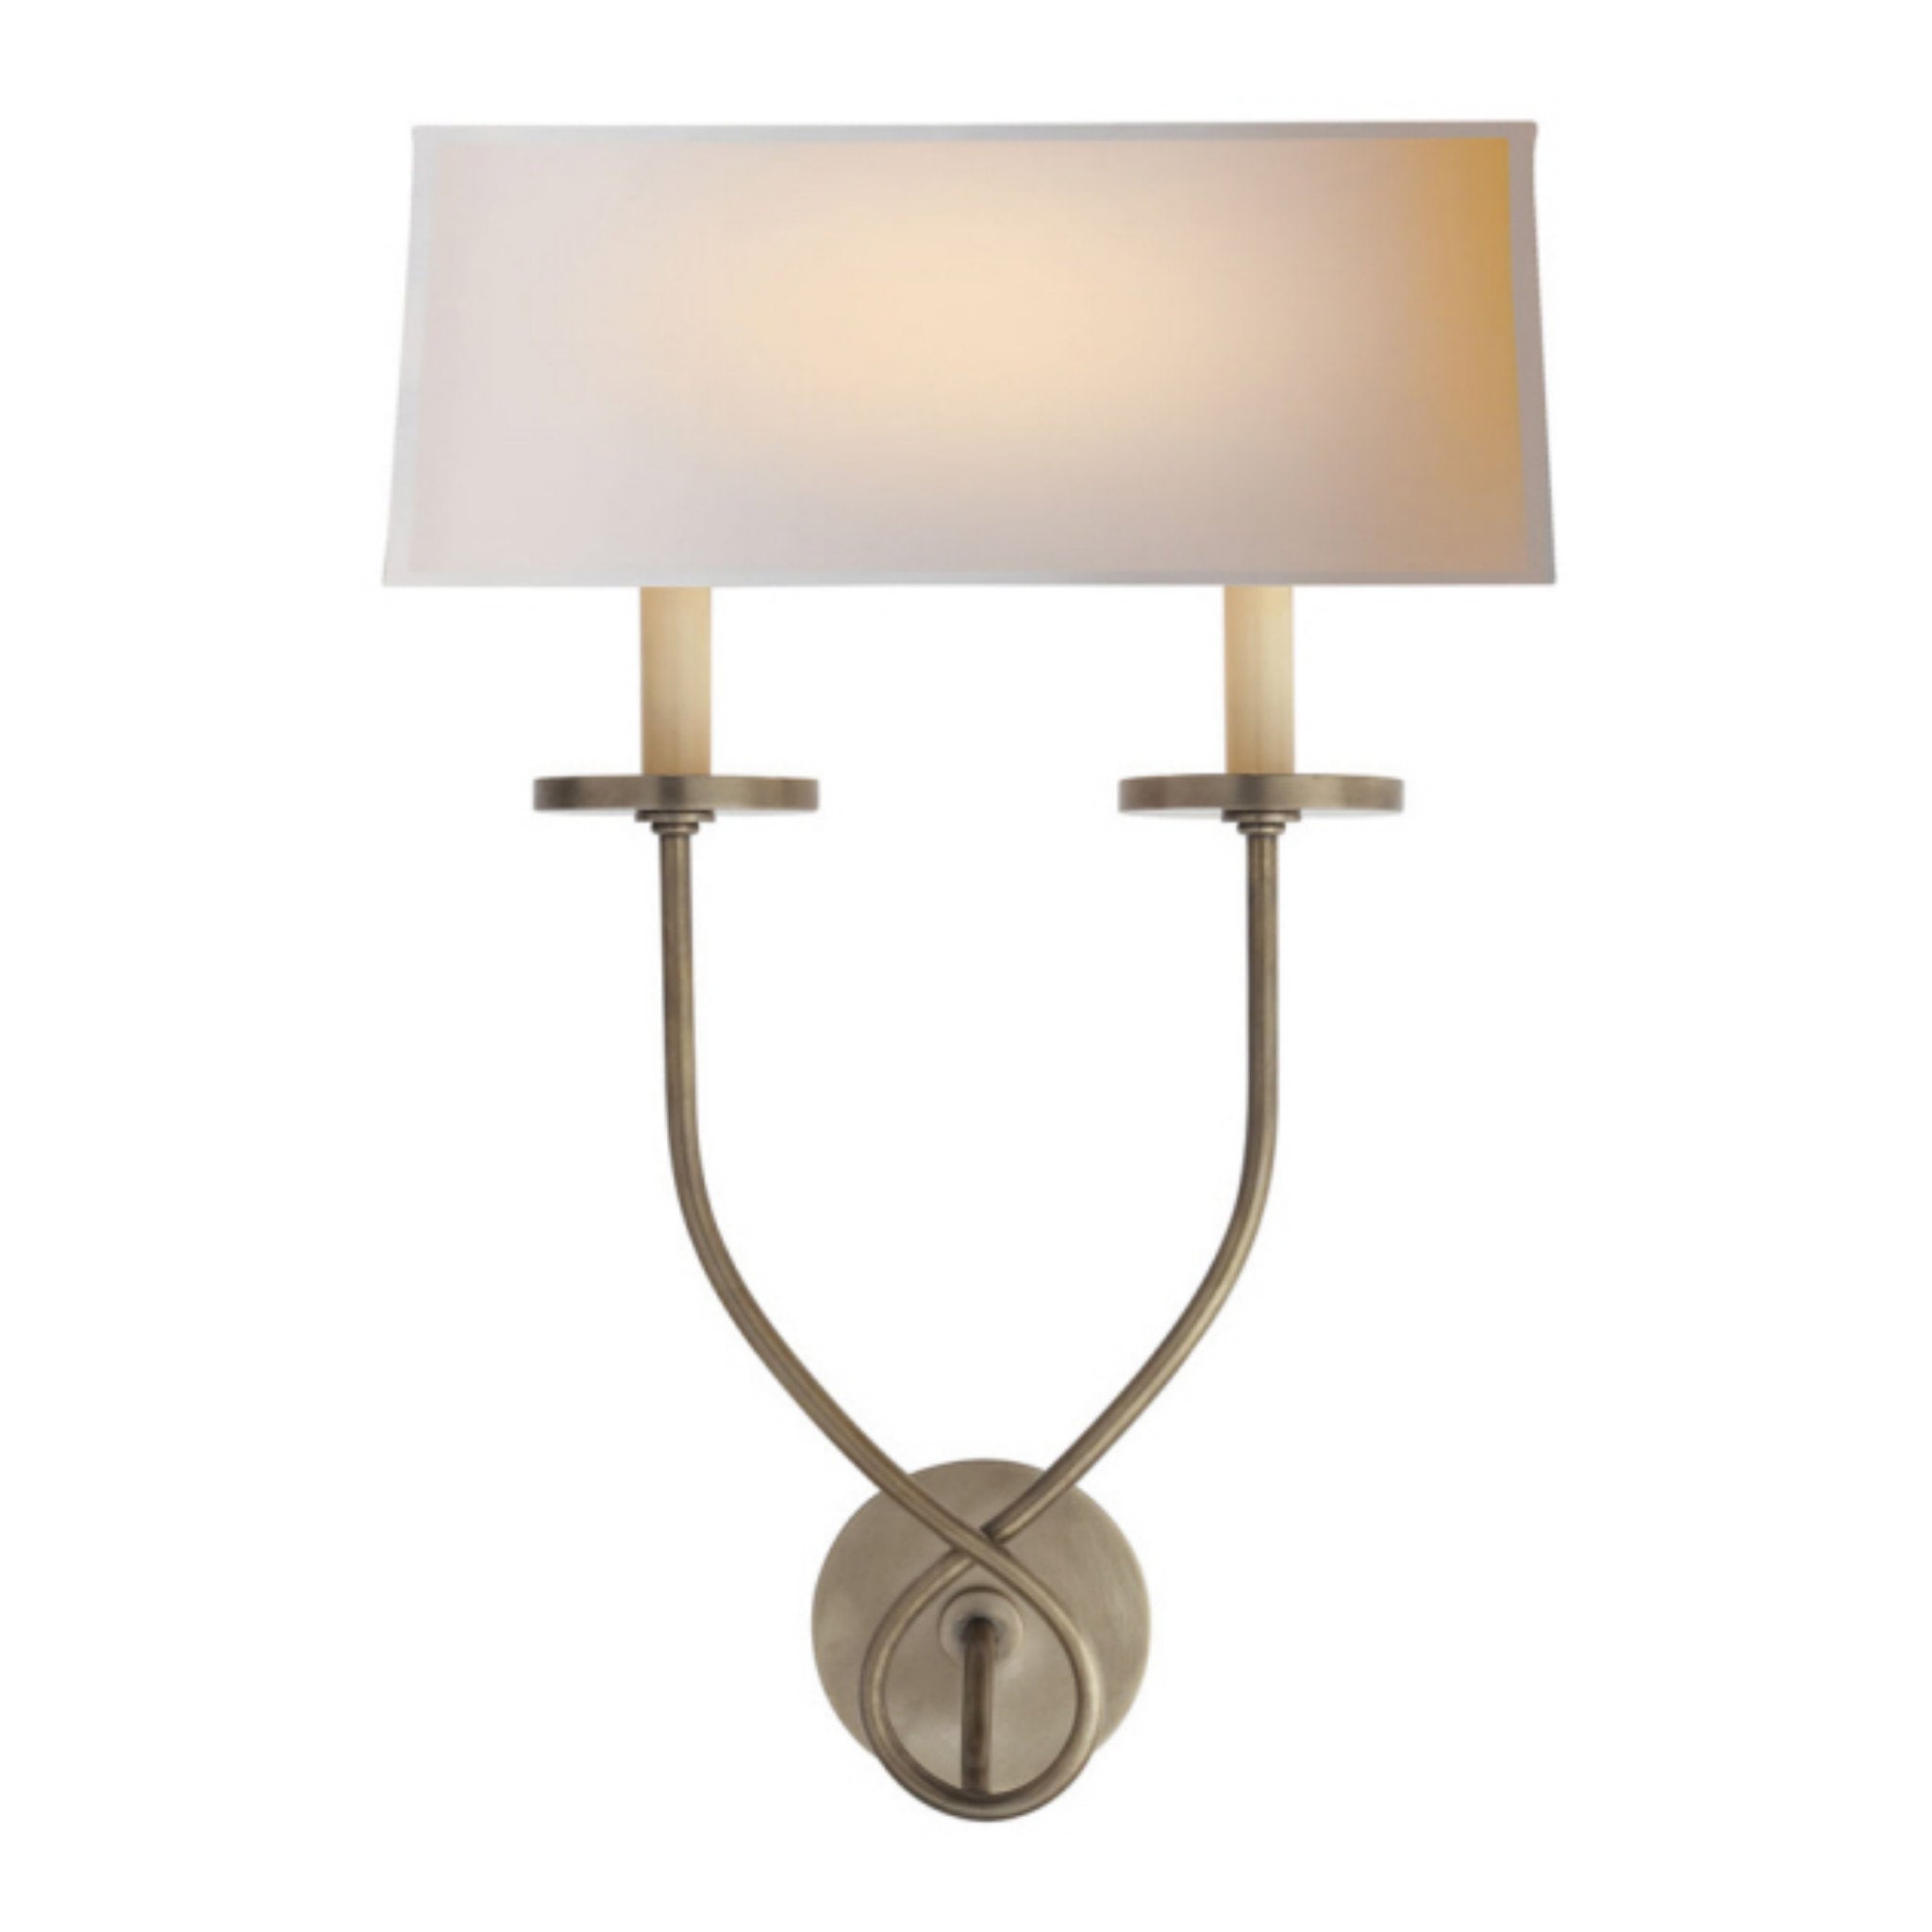 Chapman & Myers Square Tube Single Sconce in Antique Nickel with Natur